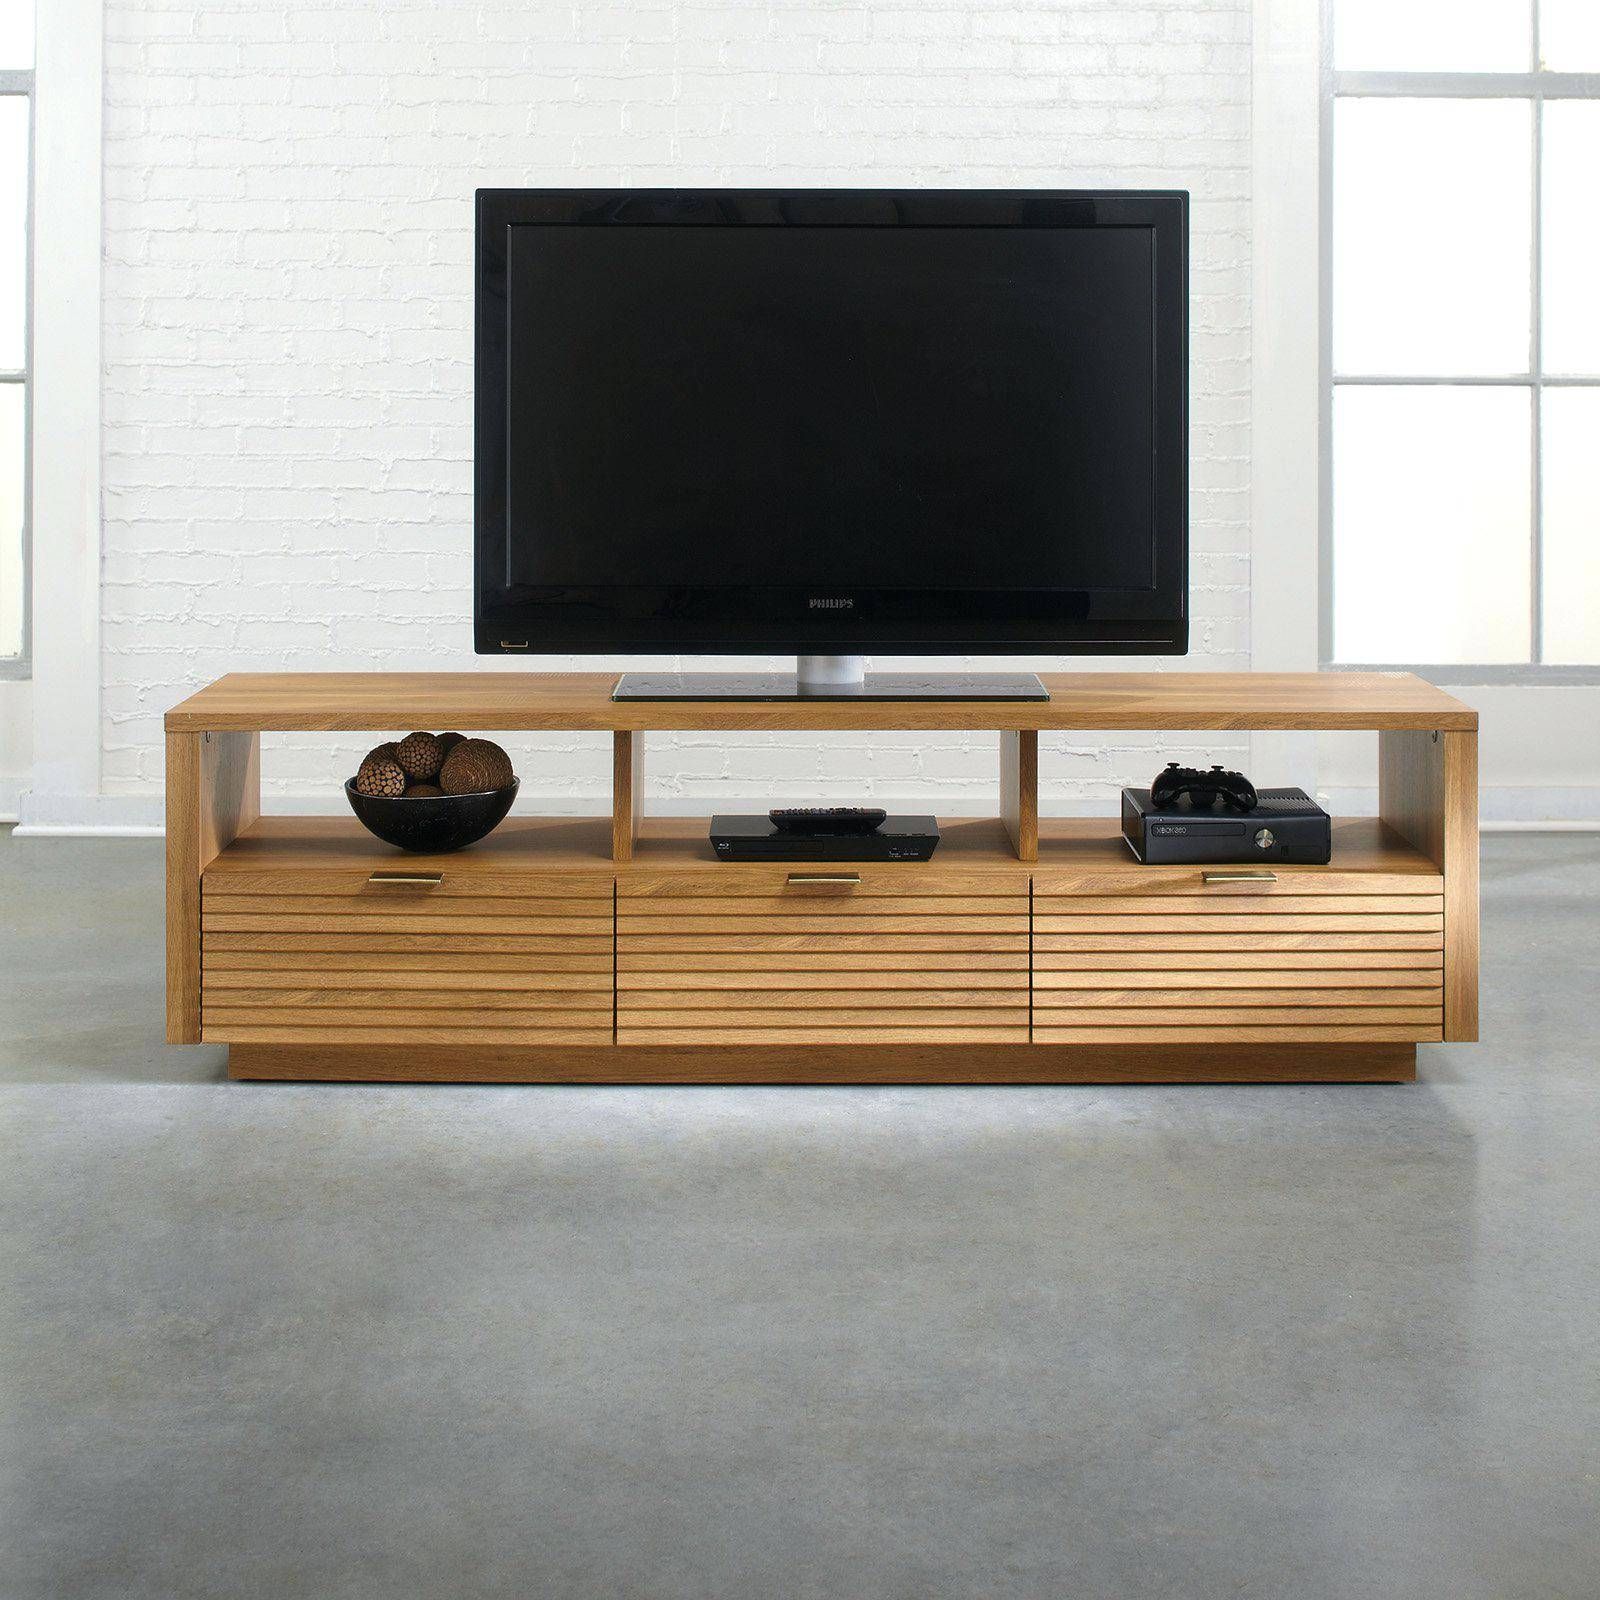 Tv Stand : Trendy Credenza Tv Stand For Living Space Credenza 67 In Trendy Tv Stands (View 4 of 15)